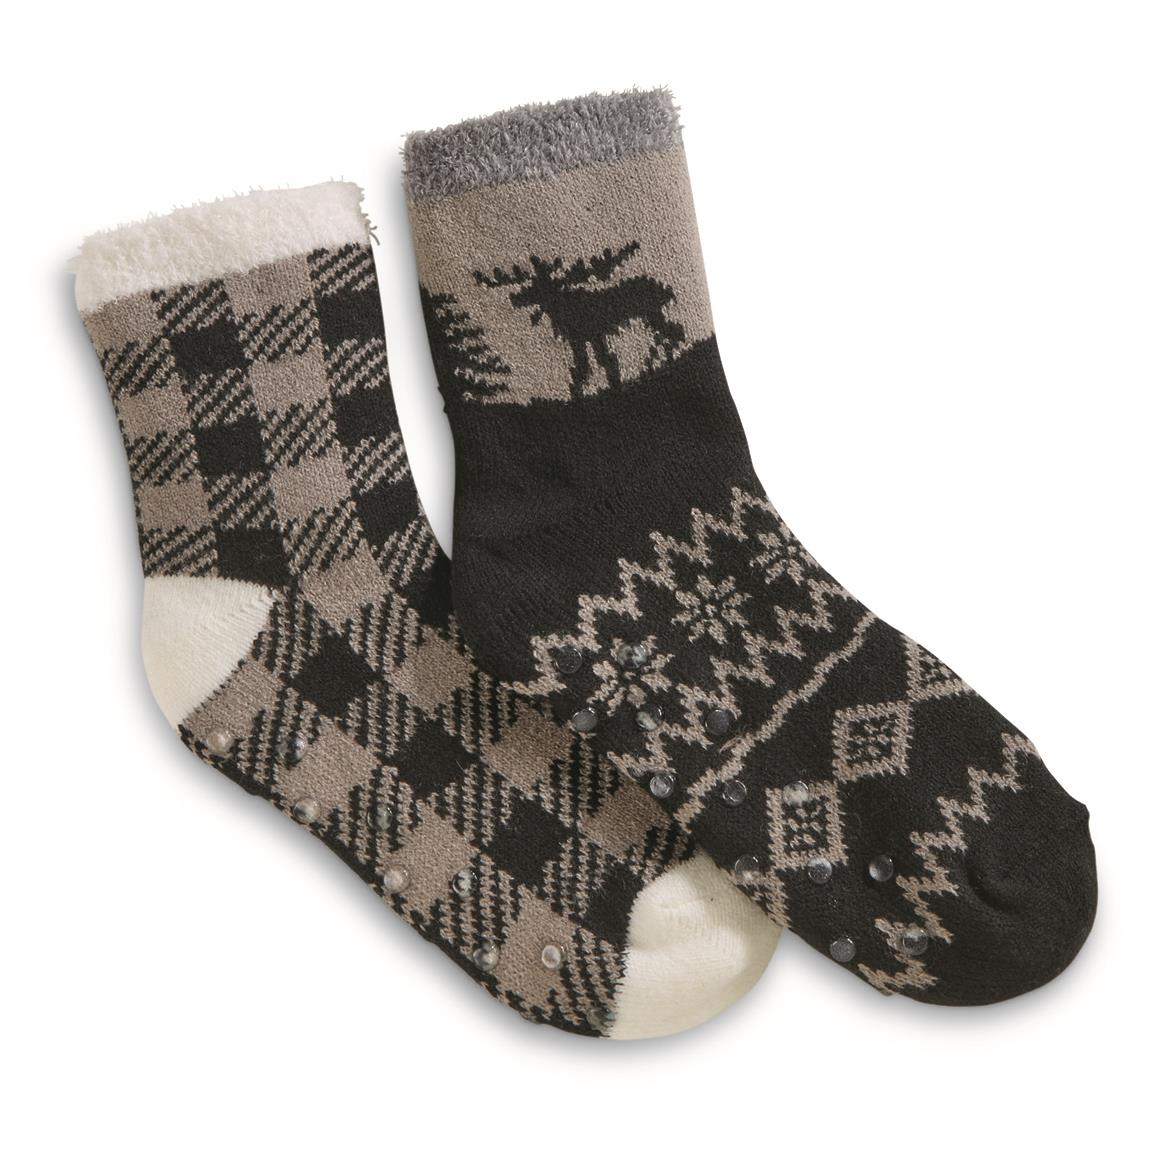 Guide Gear Women's Double-layer Gripper Socks, 2 Pairs, Grey Moose/plaid